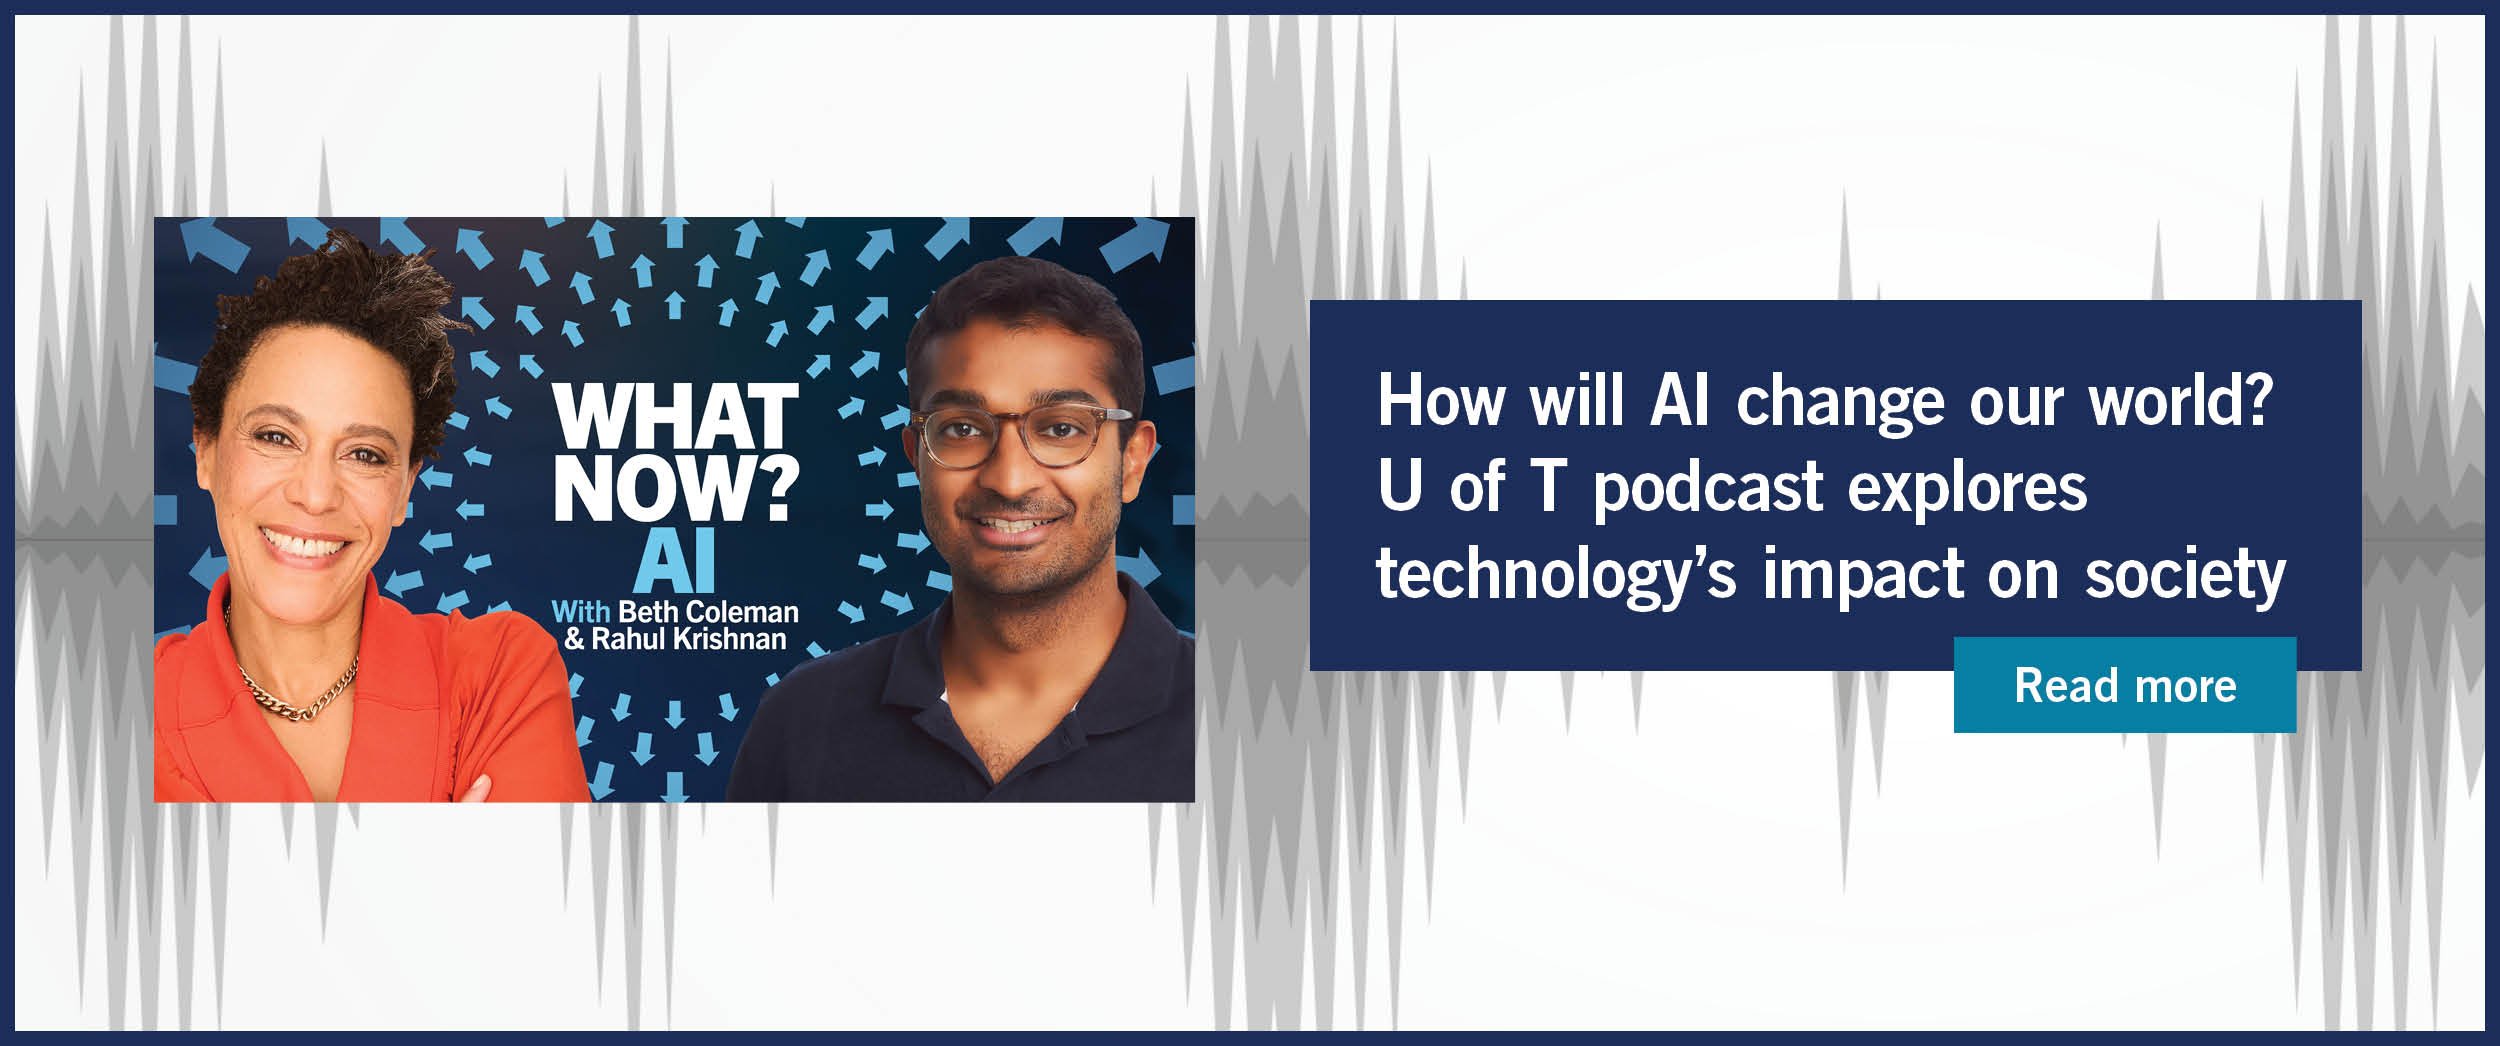 How will AI change our world? U of T podcast explores technology’s impact on society